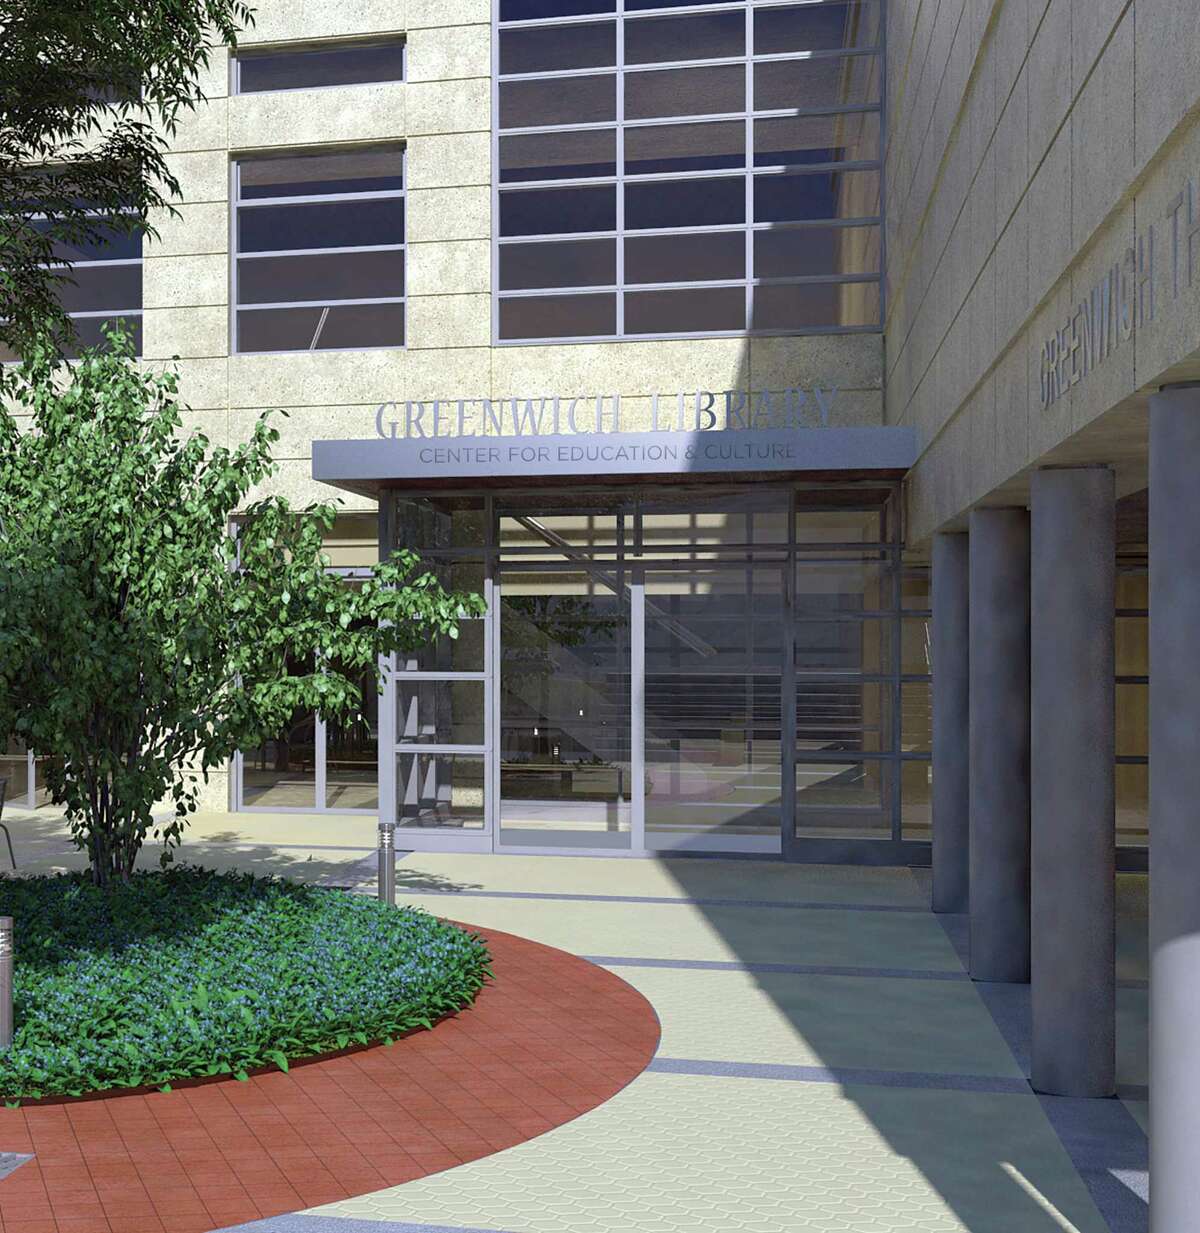 An artist’s rendering shows the plans for the new entrance to the Greenwich Library.